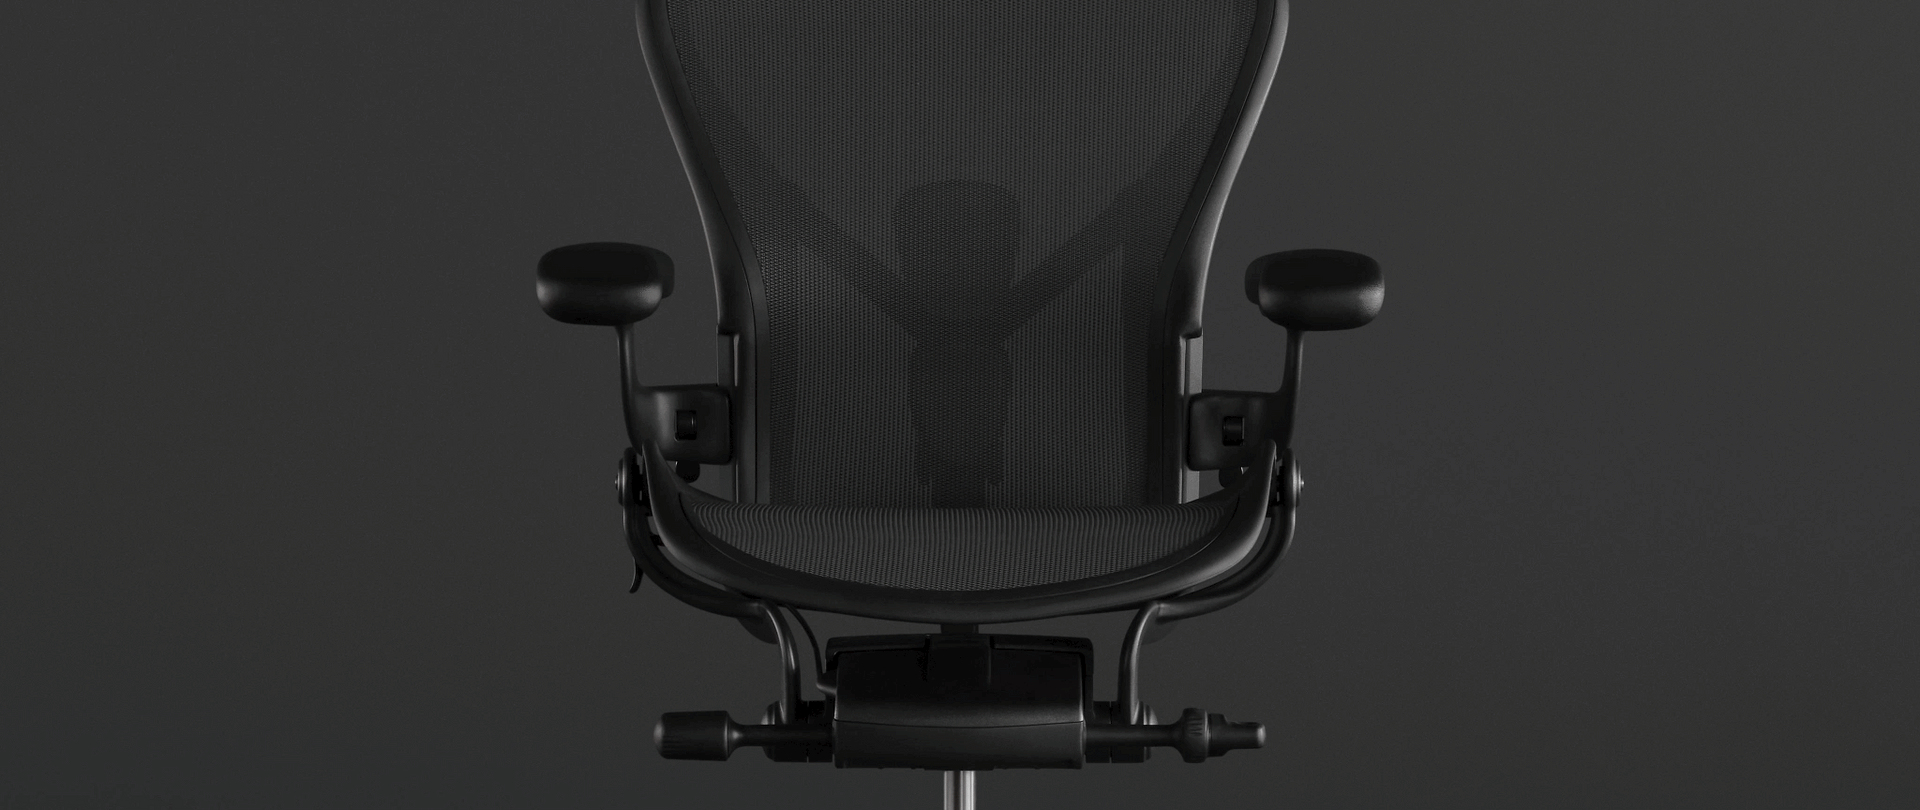 An animation highlighting the new cooling foam in the Embody Gaming Chair’s seat, overlaid on a photo of the chair on a black background.